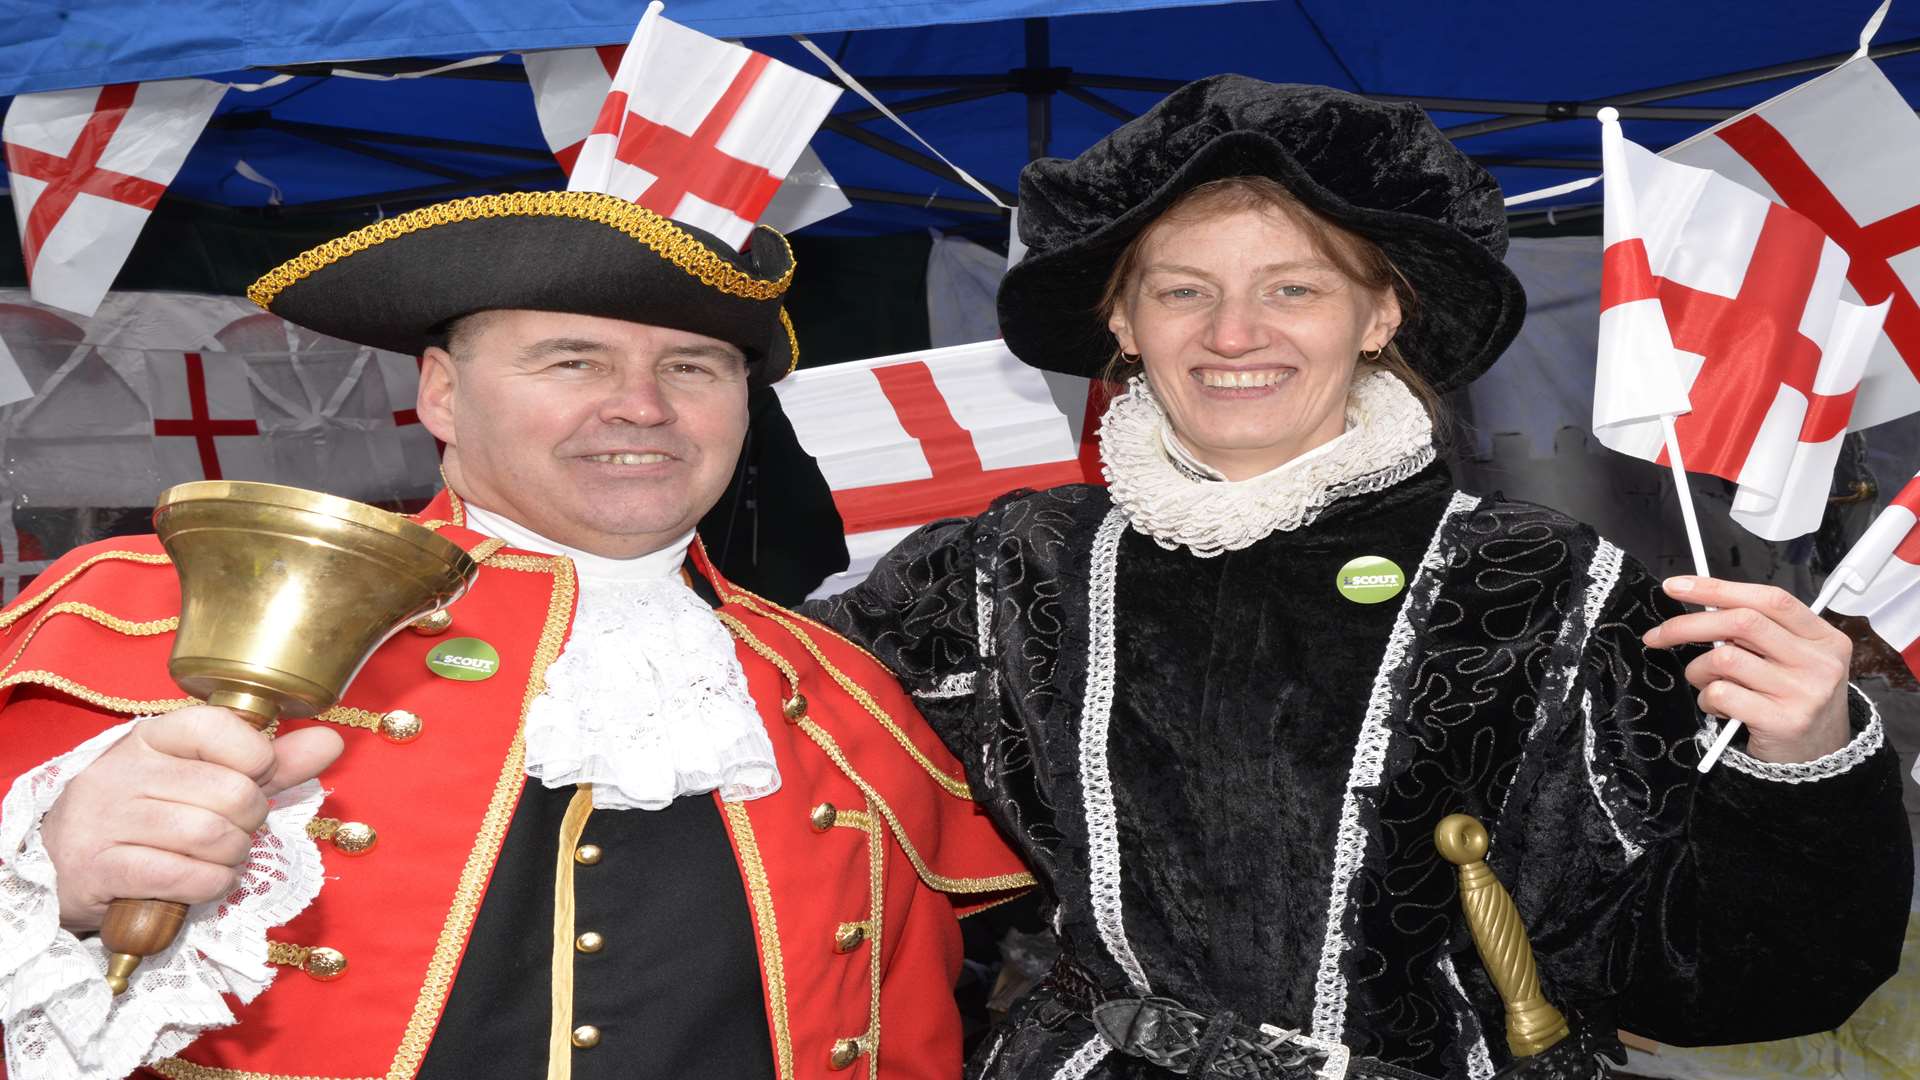 Town Cryer Richard Spooner, with Andrea Don dressed as William Shakespeare.